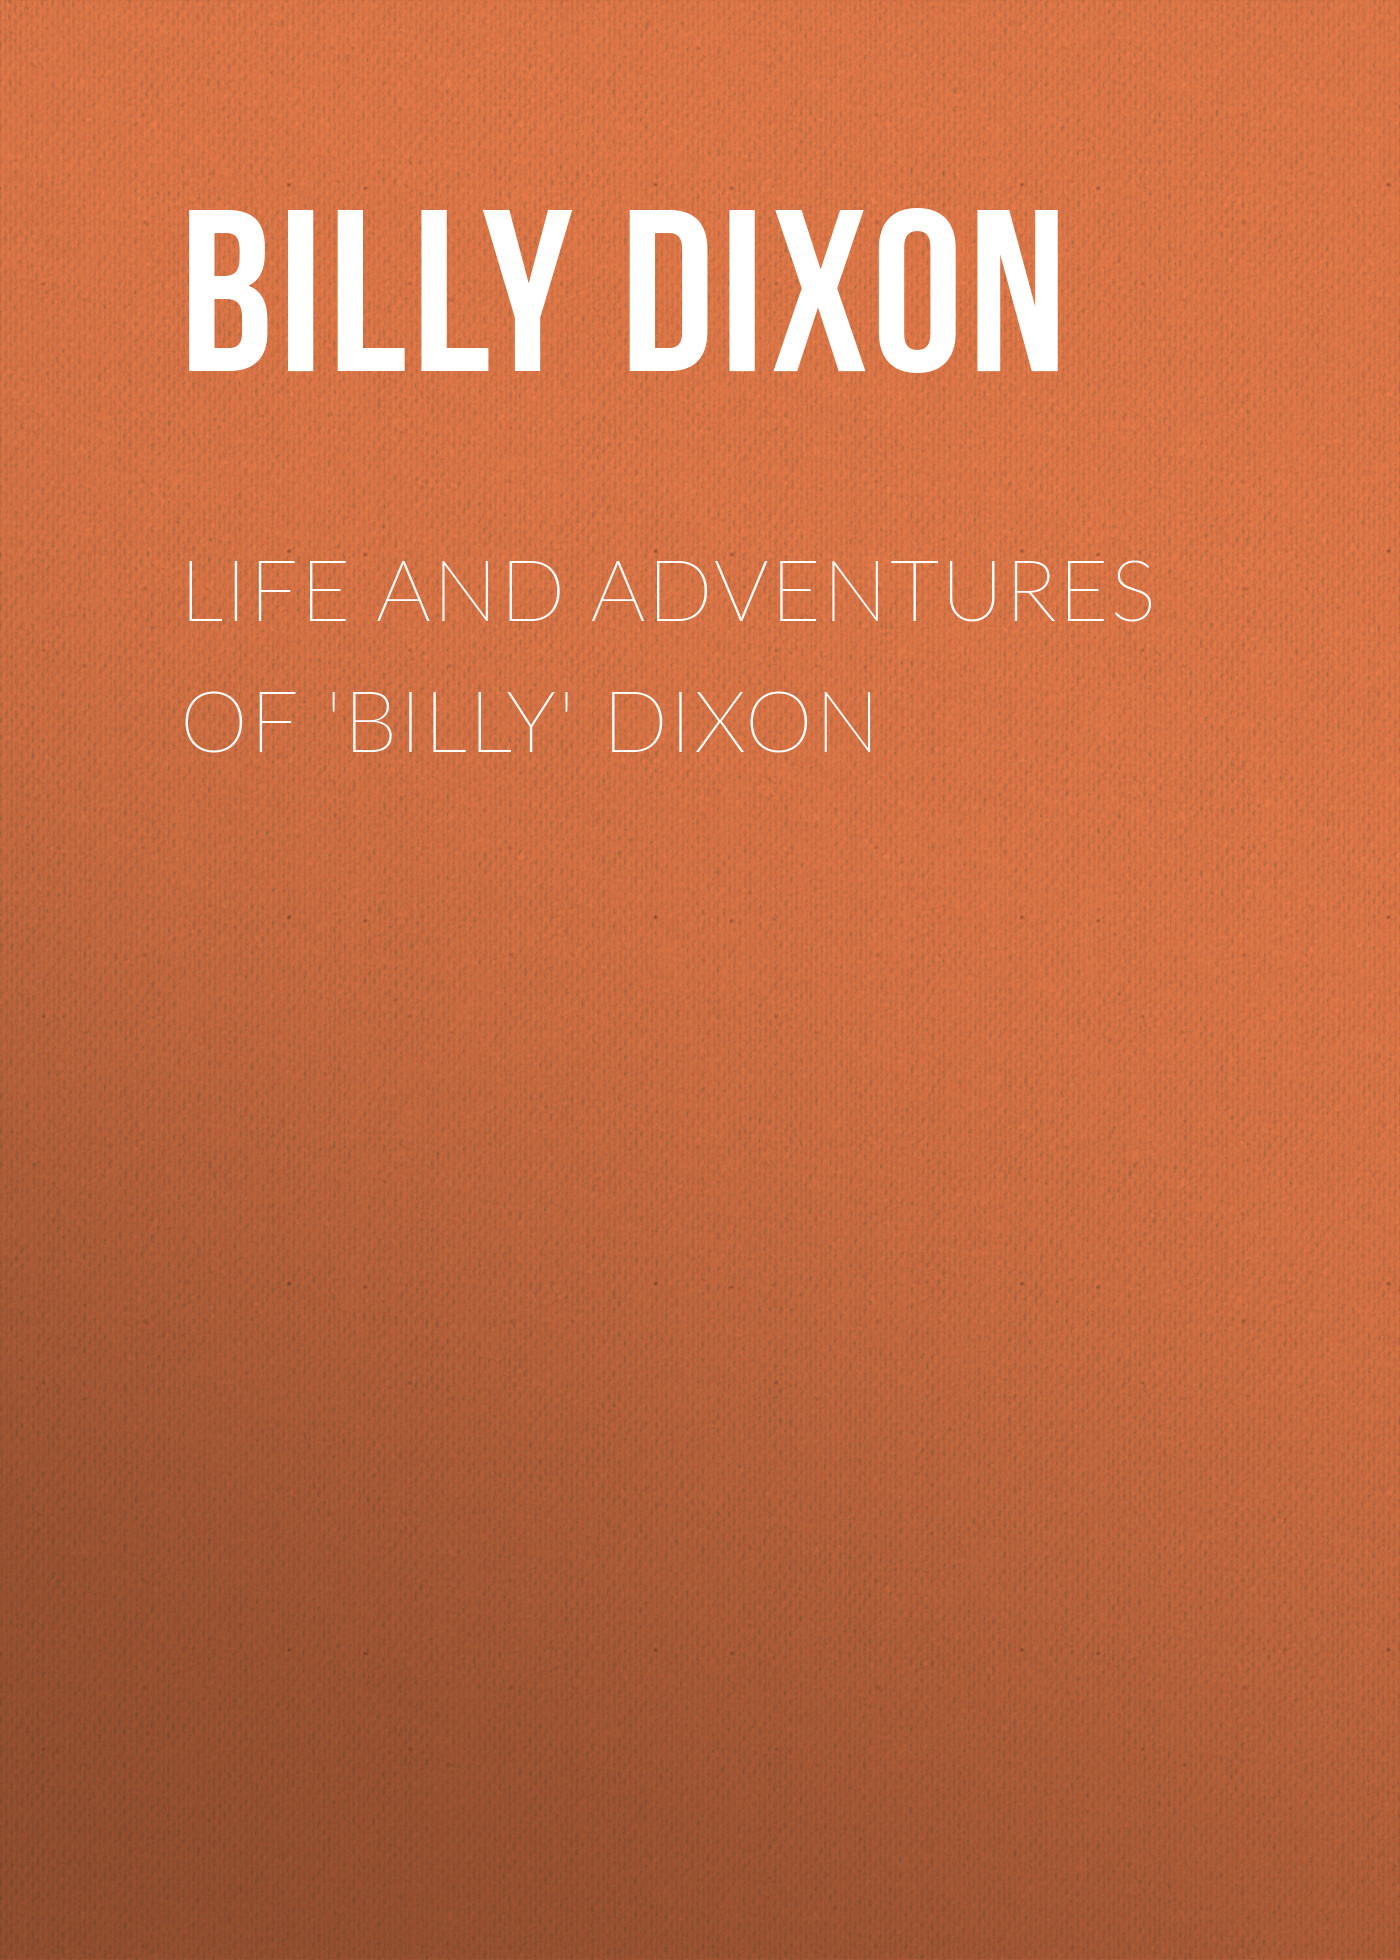 Life and Adventures of'Billy'Dixon